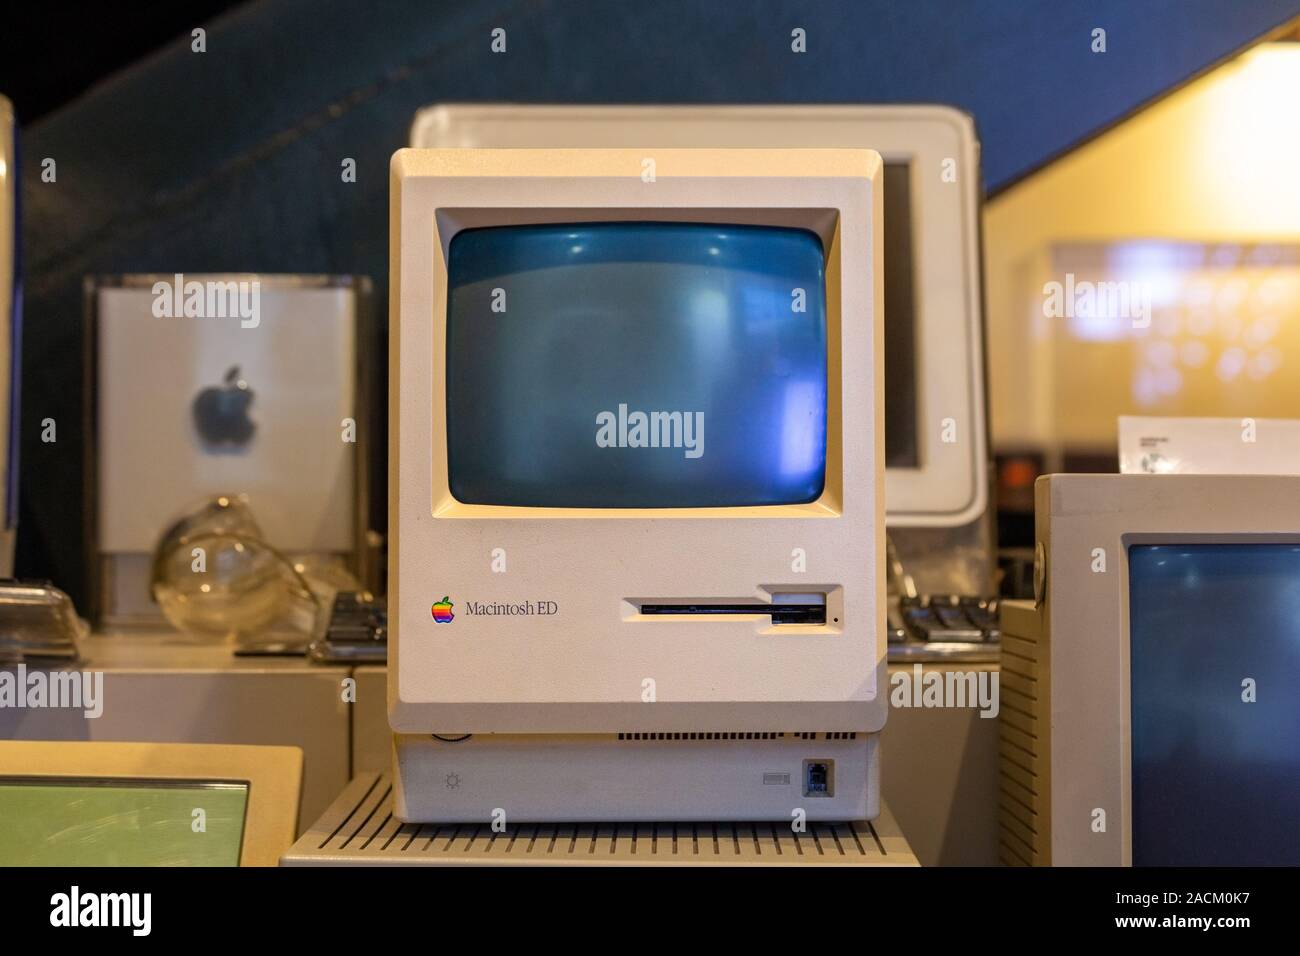 Old Macintosh ED personal computer by Apple along with other models at Rahmi M. Koc Industrial Museum in Istanbul. Stock Photo